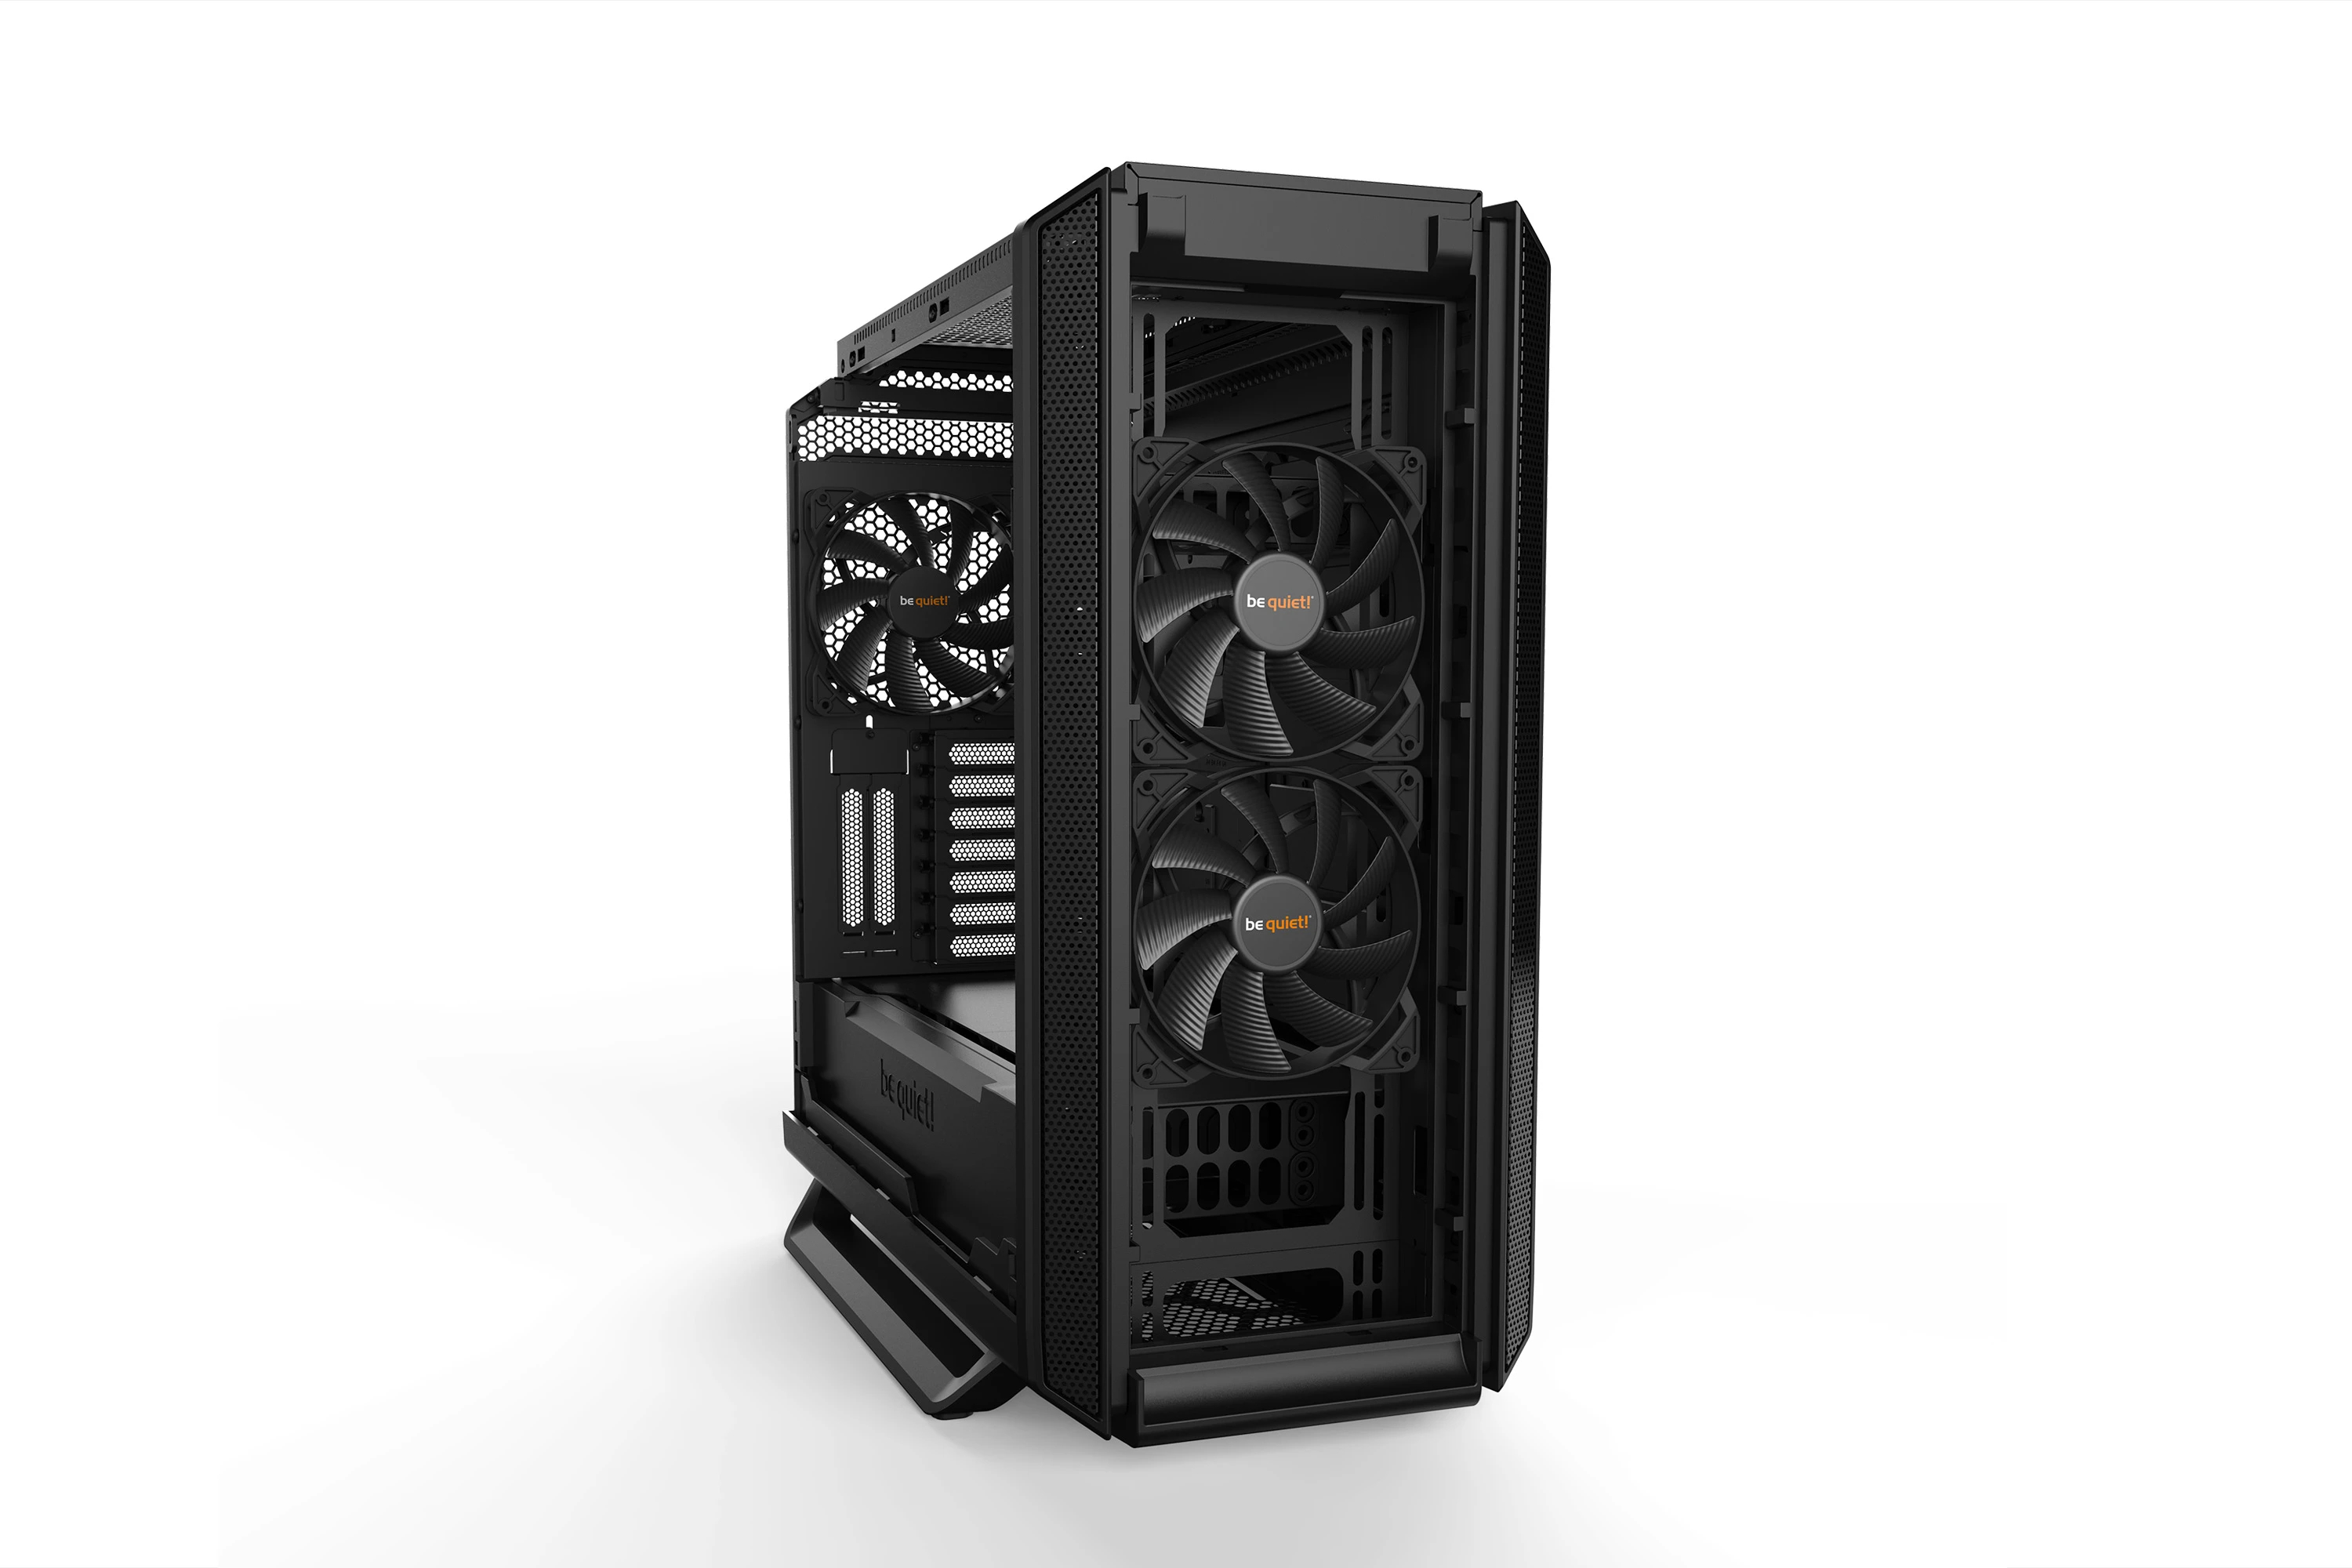 be quiet! SILENT BASE 802 Black, E-ATX/ATX/M-ATX/Mini-ITX, 3x Pure Wings 2 140mm, 4-step fan controller with PWM Hub, 2x USB 3.2 Gen. 1, 1x USB 3.2 Gen. 2 Type C, Mic + Audio, Interchangeable top cover and front panel, 3Y warranty - image 4